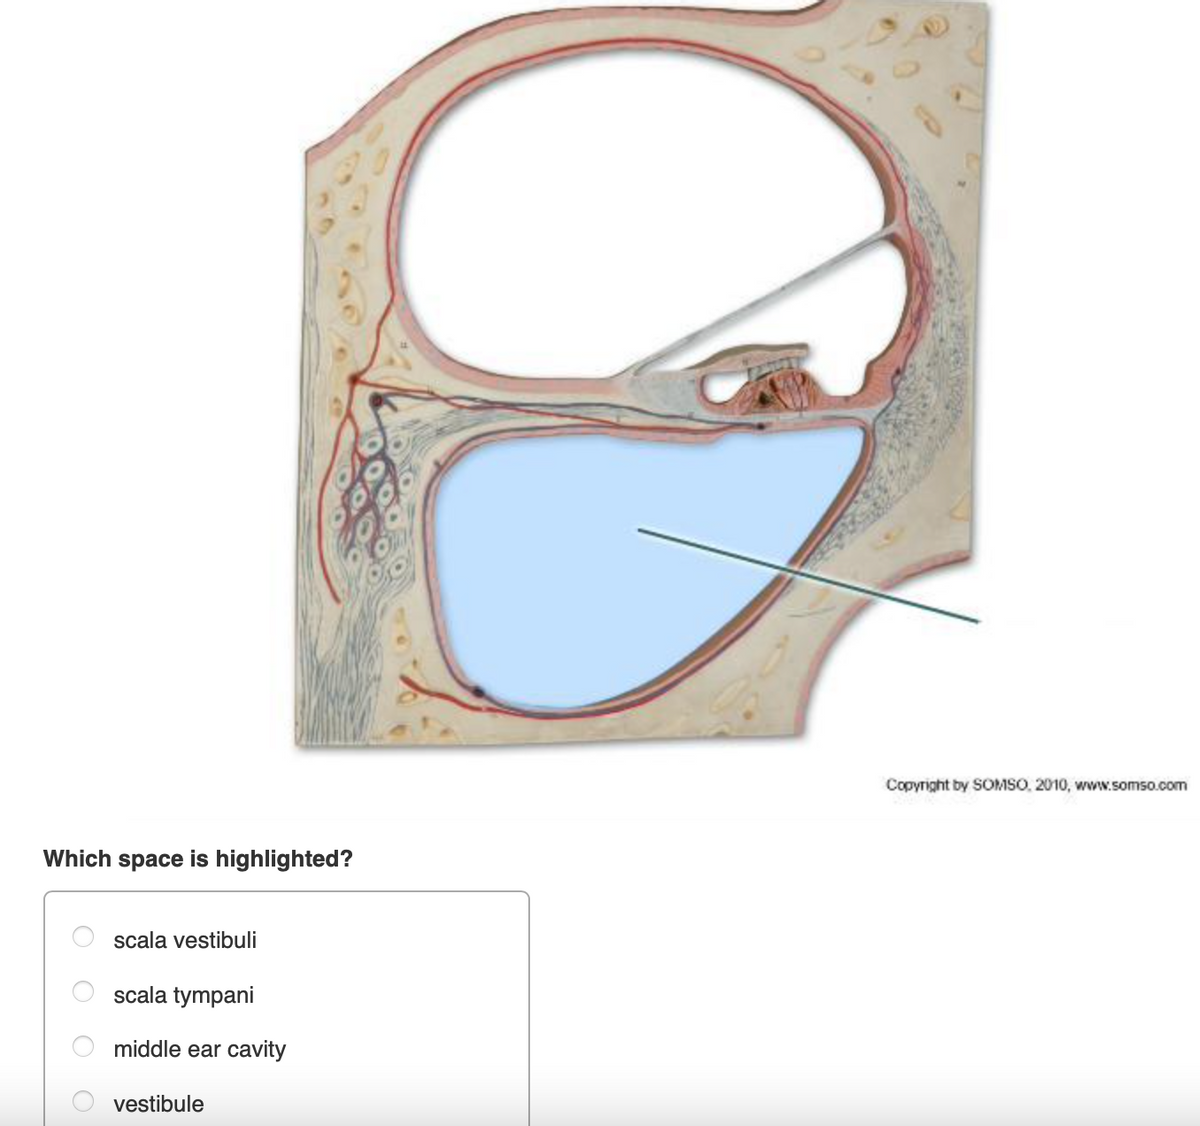 Copyright by SOMSO, 2010, www.somso.com
Which space is highlighted?
scala vestibuli
scala tympani
middle ear cavity
vestibule
